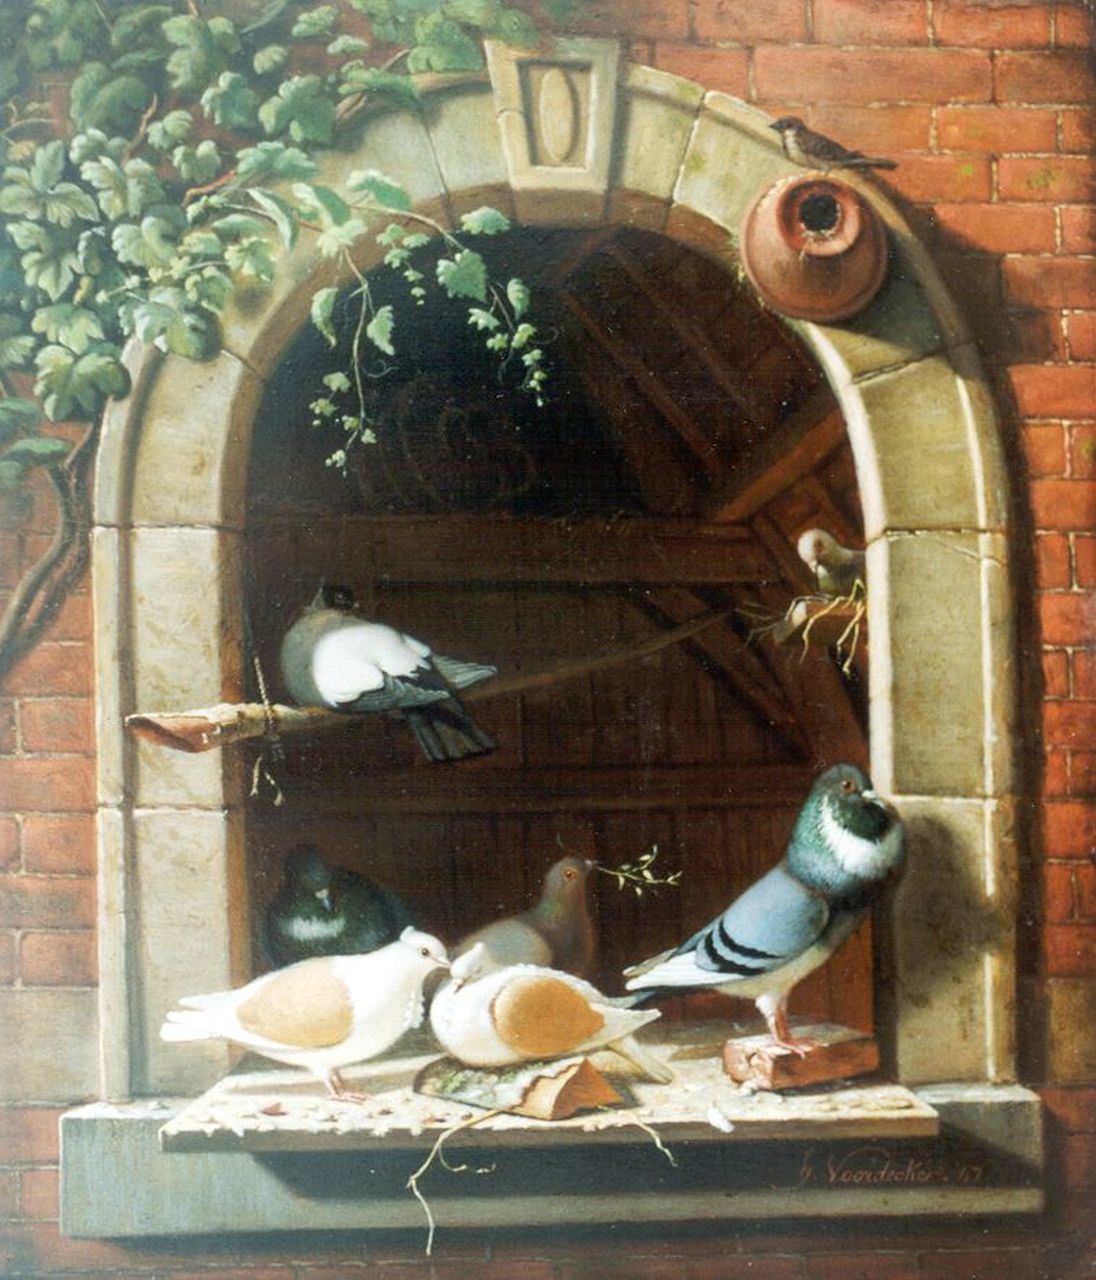 Henri Voordecker | Pigeons on a windowstill, oil on panel, 29.3 x 24.8 cm, signed l.r. and dated '47